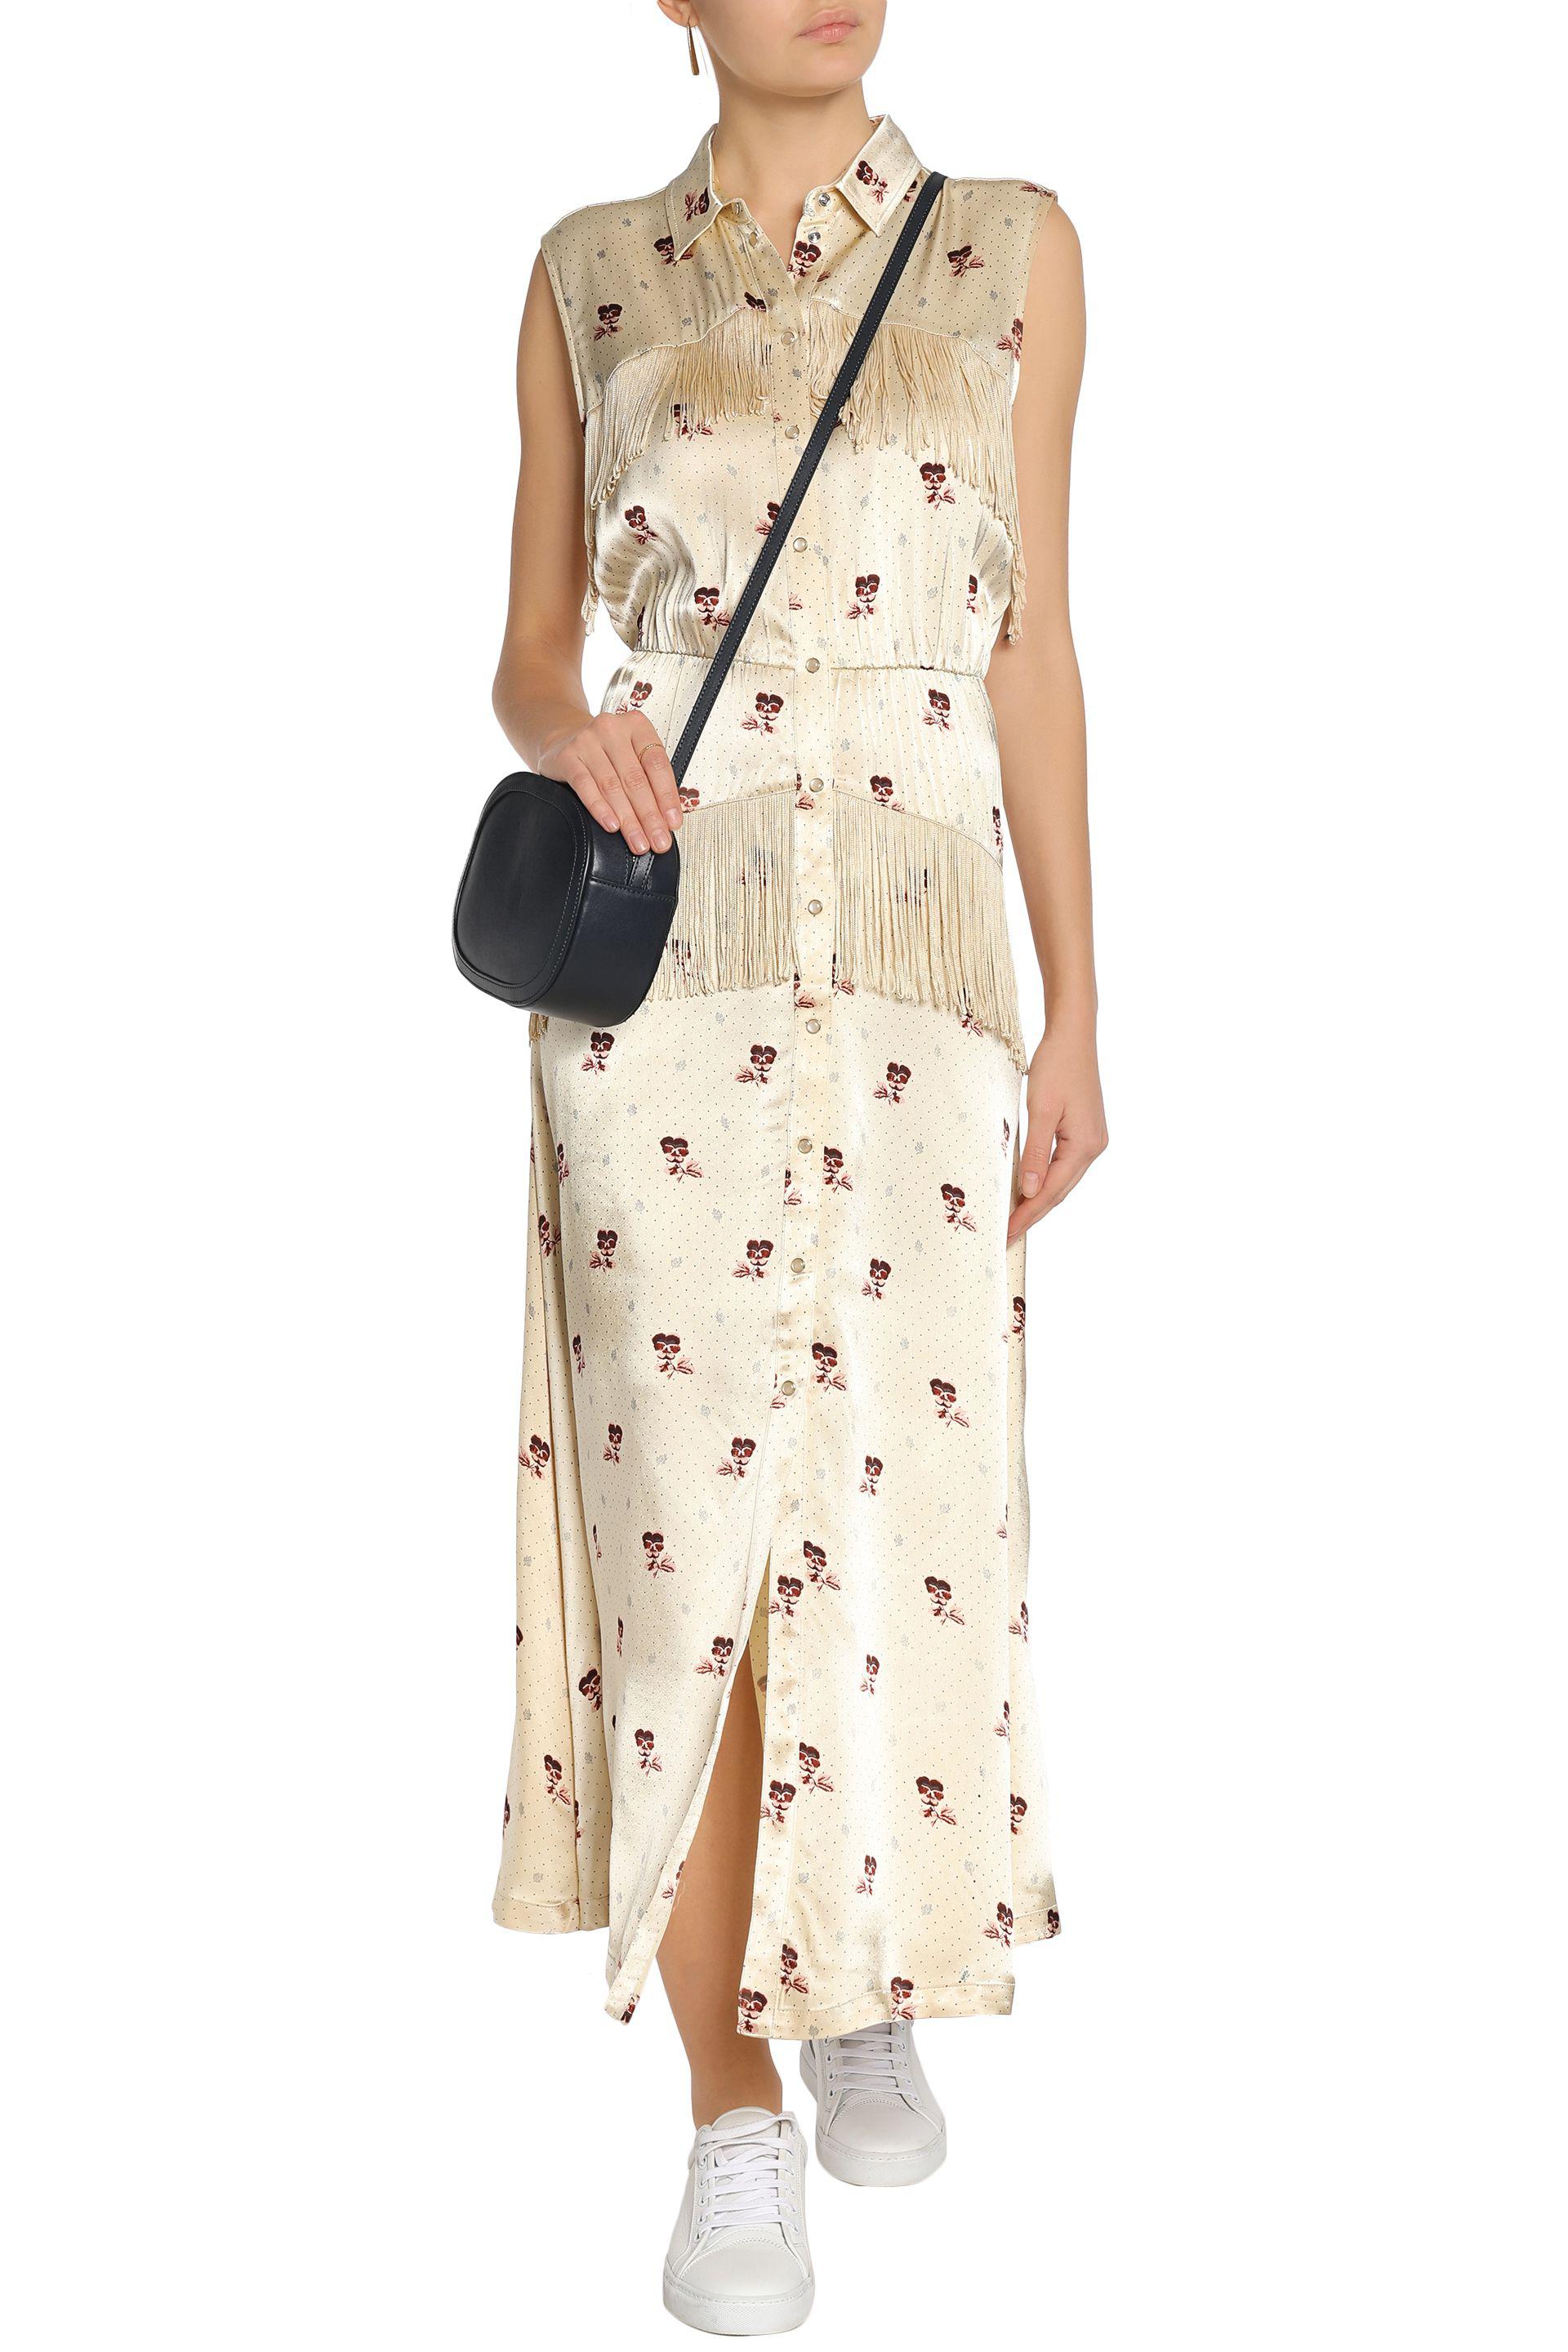 Ganni Donnelly Fringed Floral-print Satin Midi Dress in Beige (Natural) -  Lyst